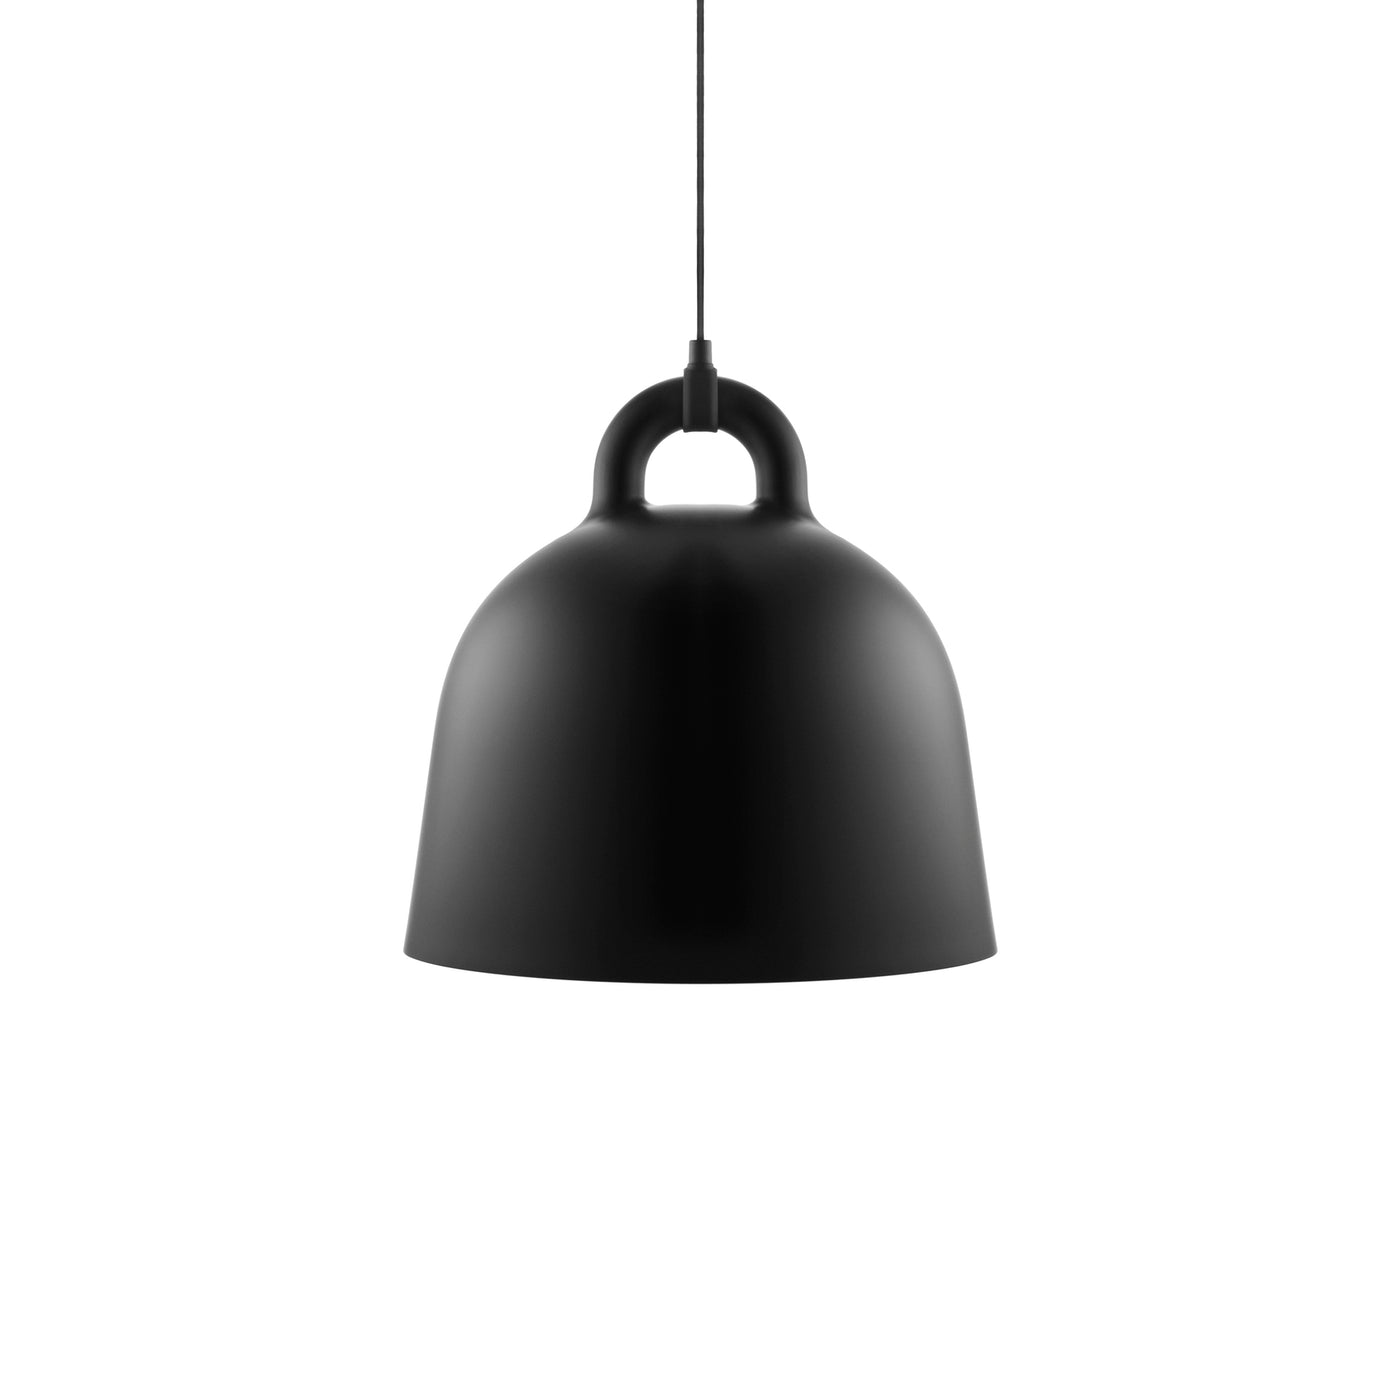 Norman Copenhagen Bell Pendant Lamp in black. Free UK delivery from someday designs #size_medium